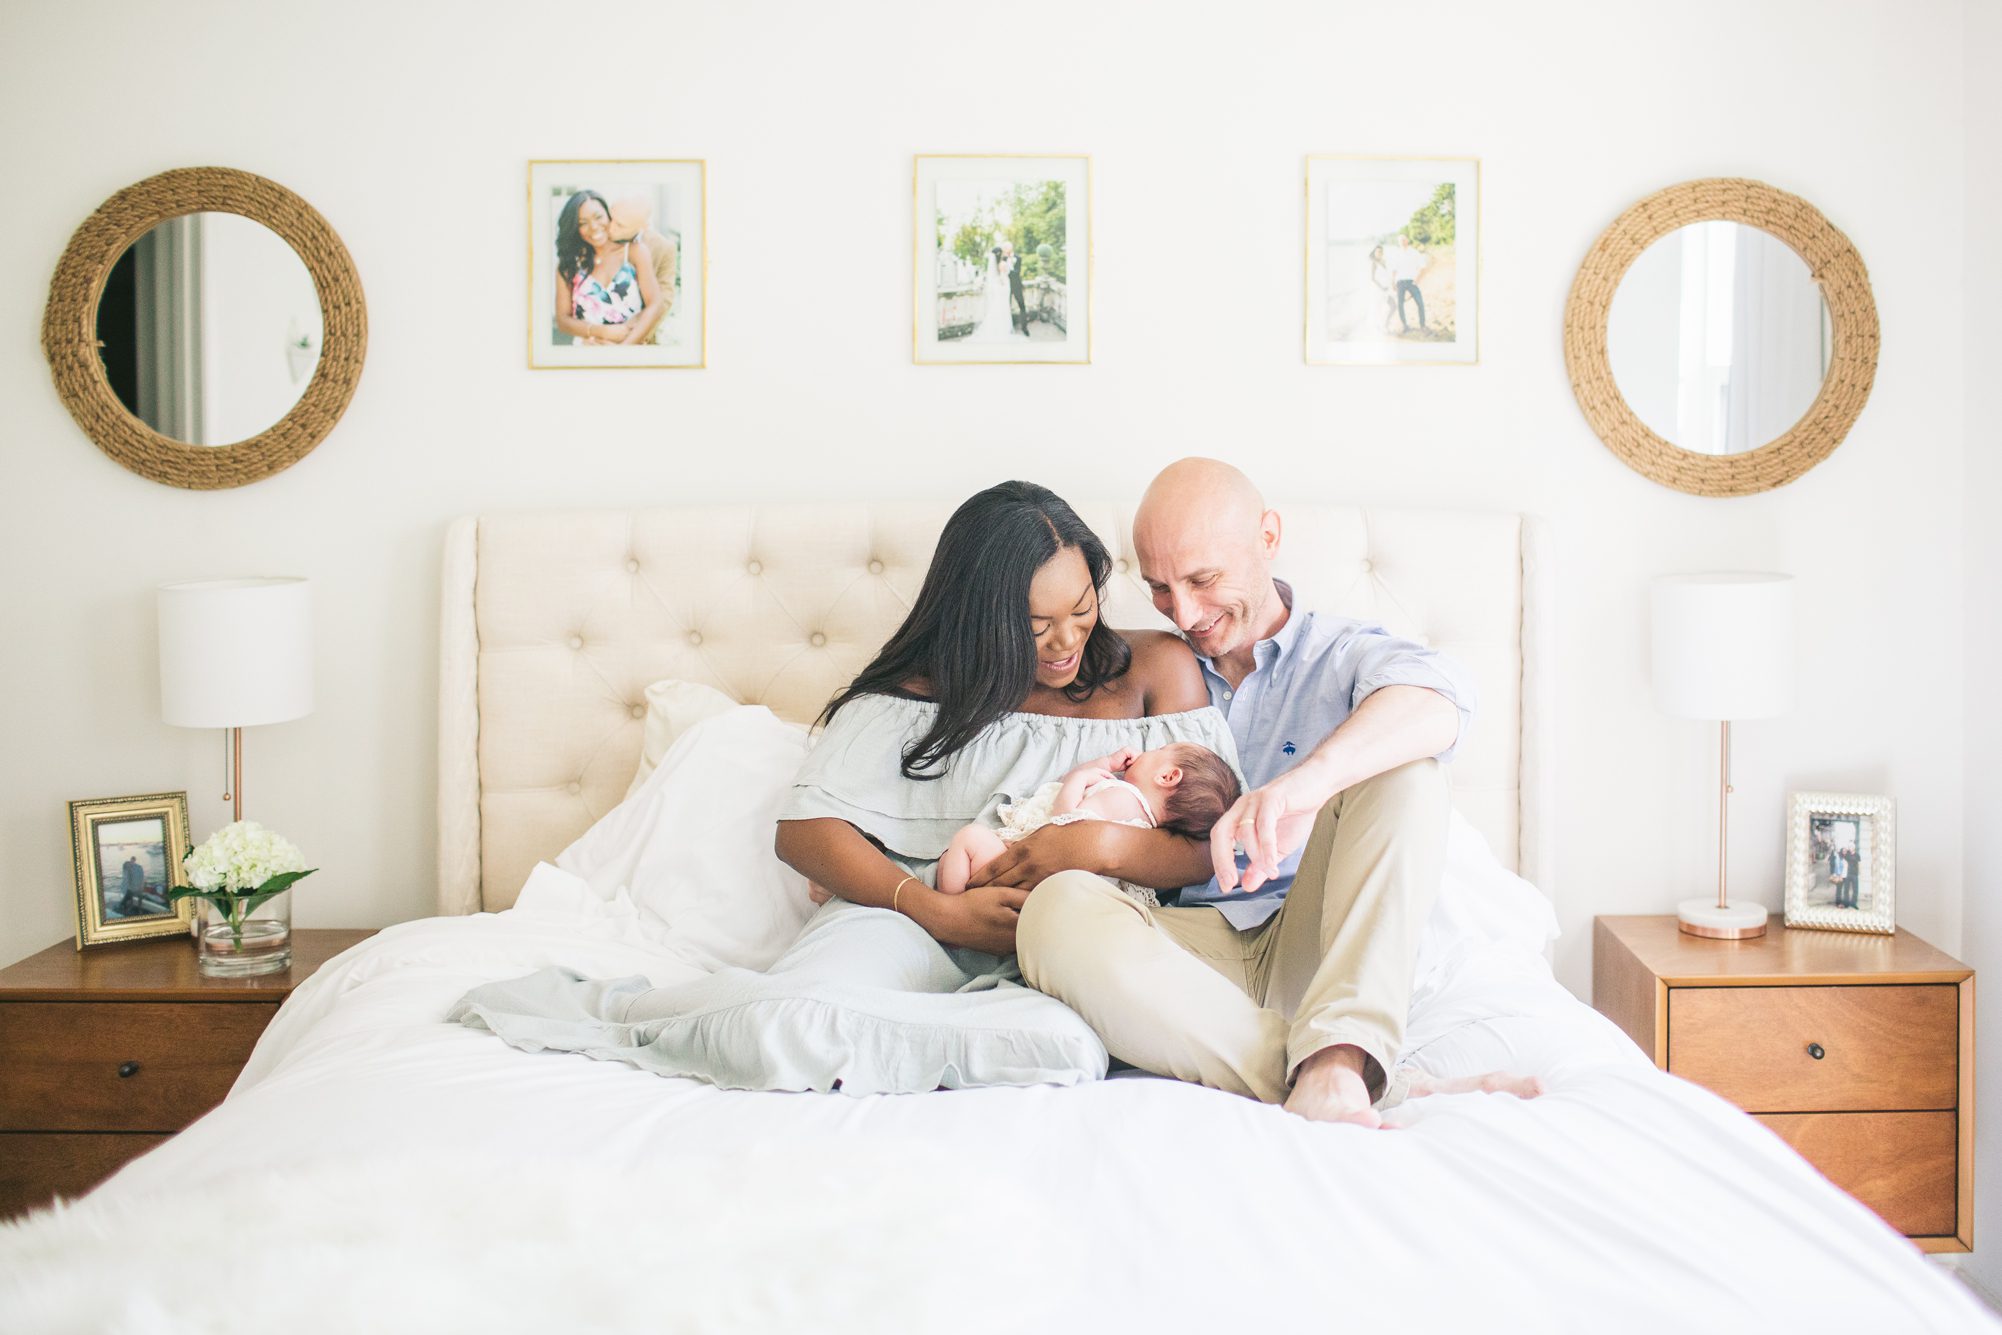 Mom and Dad on bed holding baby girl during Washington DC lifestyle newborn session. Photo by LRG Portraits.